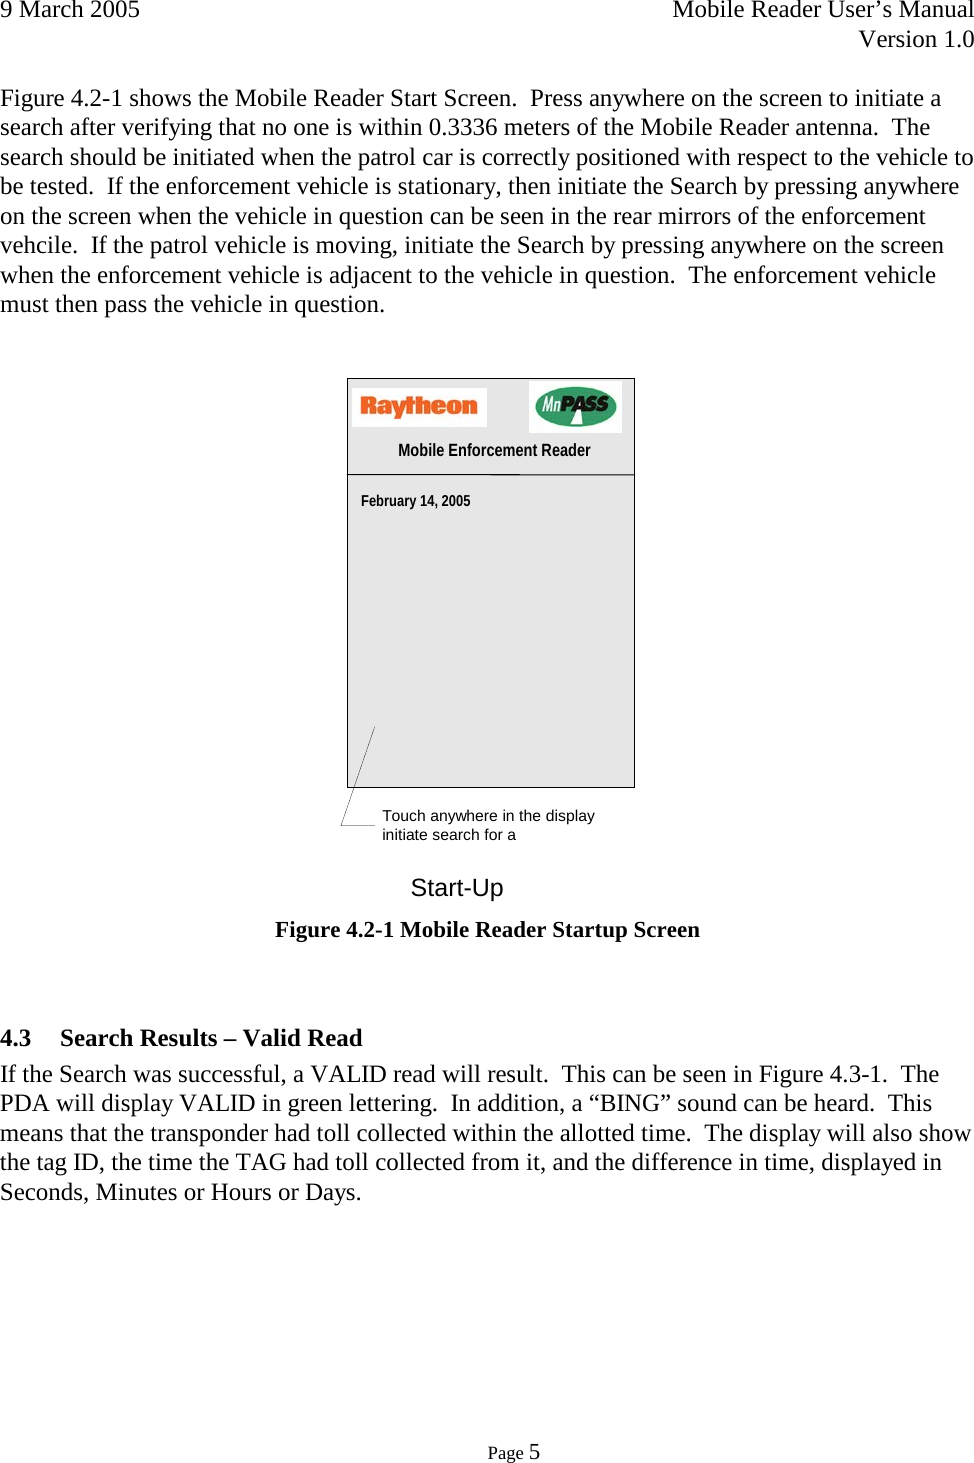 9 March 2005    Mobile Reader User’s Manual   Version 1.0      Page 5  Figure 4.2-1 shows the Mobile Reader Start Screen.  Press anywhere on the screen to initiate a search after verifying that no one is within 0.3336 meters of the Mobile Reader antenna.  The search should be initiated when the patrol car is correctly positioned with respect to the vehicle to be tested.  If the enforcement vehicle is stationary, then initiate the Search by pressing anywhere on the screen when the vehicle in question can be seen in the rear mirrors of the enforcement vehcile.  If the patrol vehicle is moving, initiate the Search by pressing anywhere on the screen when the enforcement vehicle is adjacent to the vehicle in question.  The enforcement vehicle must then pass the vehicle in question.    Figure 4.2-1 Mobile Reader Startup Screen  4.3 Search Results – Valid Read If the Search was successful, a VALID read will result.  This can be seen in Figure 4.3-1.  The PDA will display VALID in green lettering.  In addition, a “BING” sound can be heard.  This means that the transponder had toll collected within the allotted time.  The display will also show the tag ID, the time the TAG had toll collected from it, and the difference in time, displayed in Seconds, Minutes or Hours or Days.   Start-Up  February 14, 2005   Mobile Enforcement Reader Touch anywhere in the display  initiate search for a  